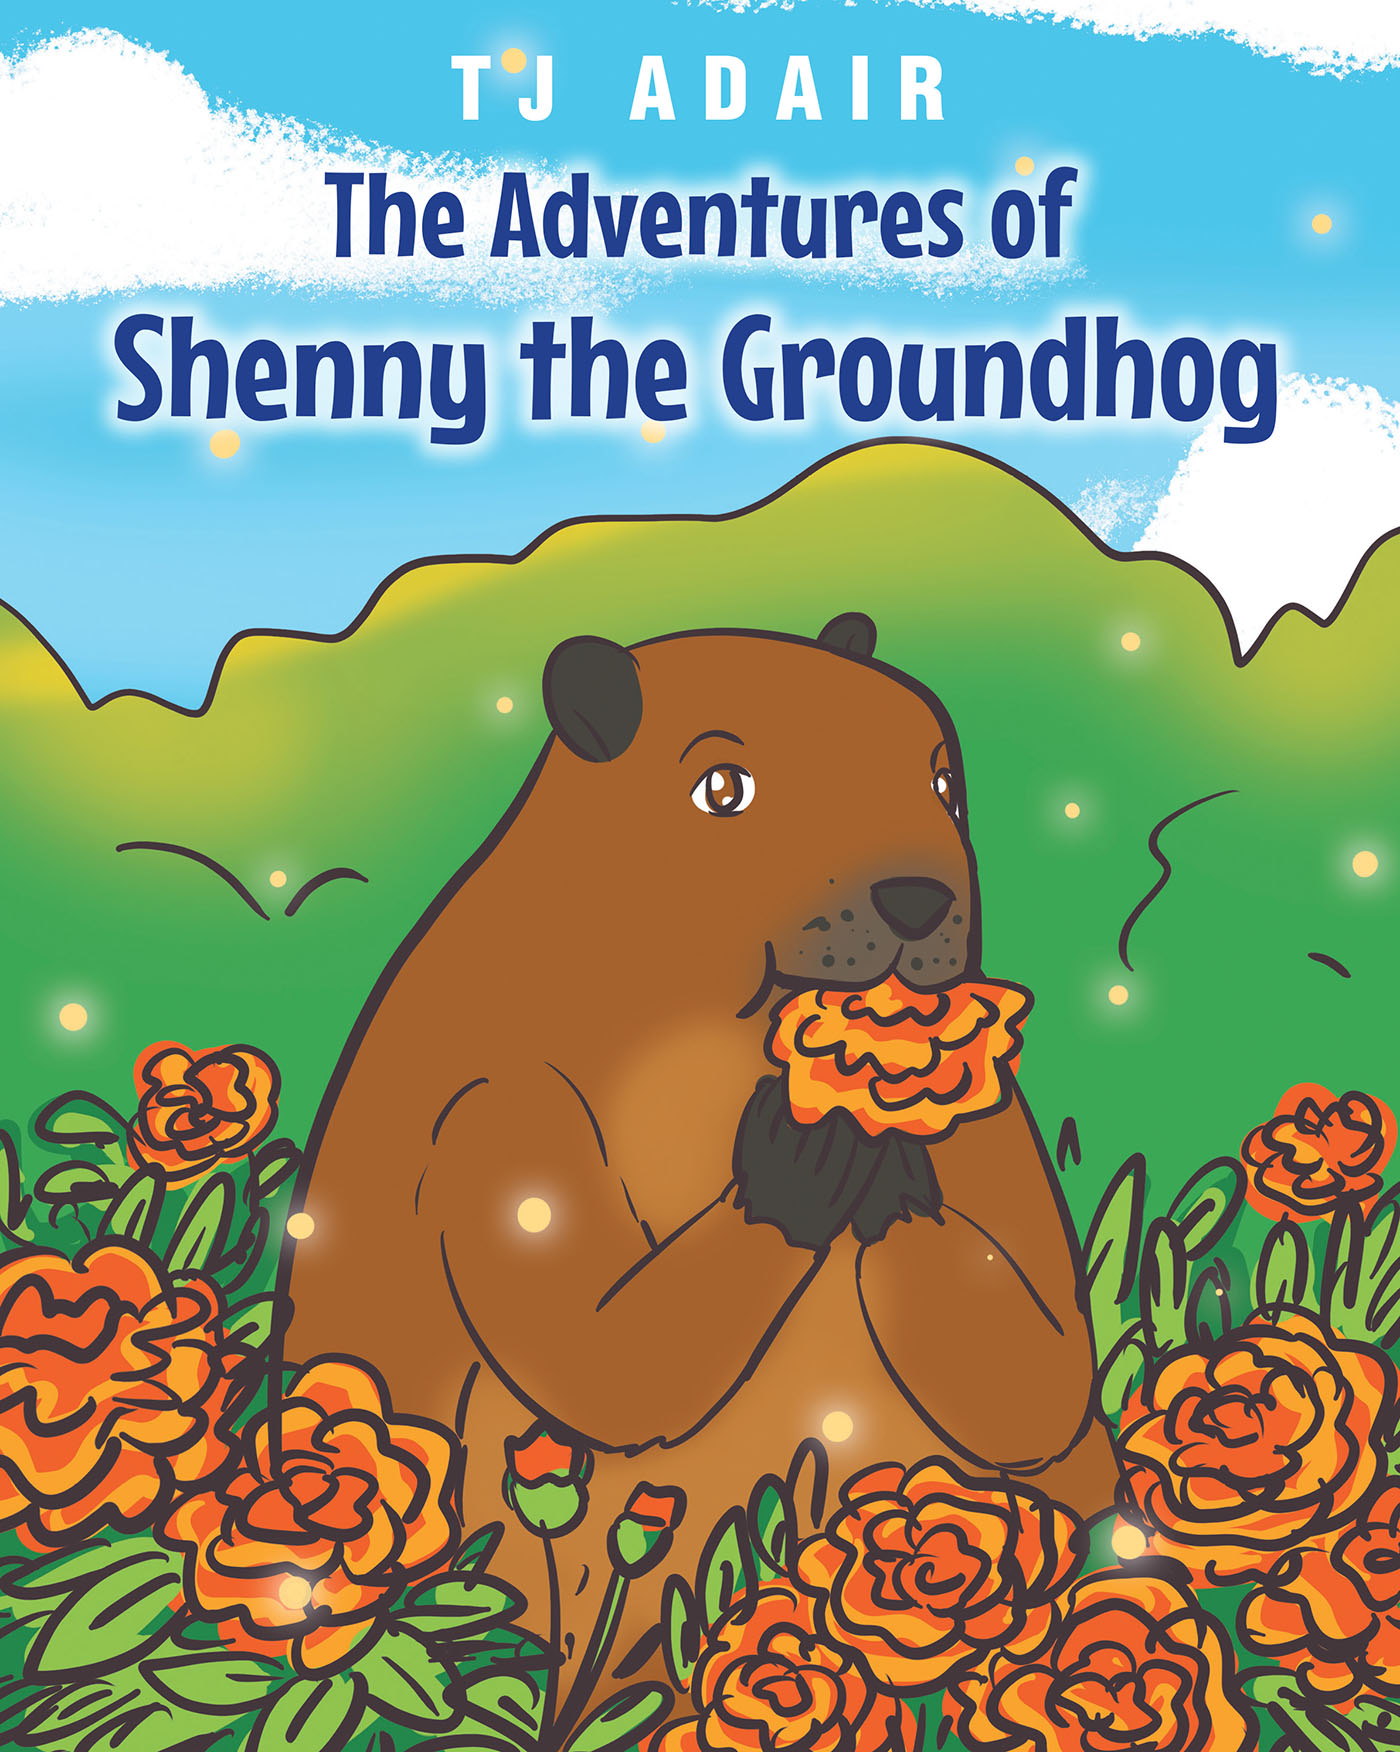 TJ Adair’s Newly Released "The Adventures of Shenny the Groundhog" is a Charming Adventure Through God’s Creation